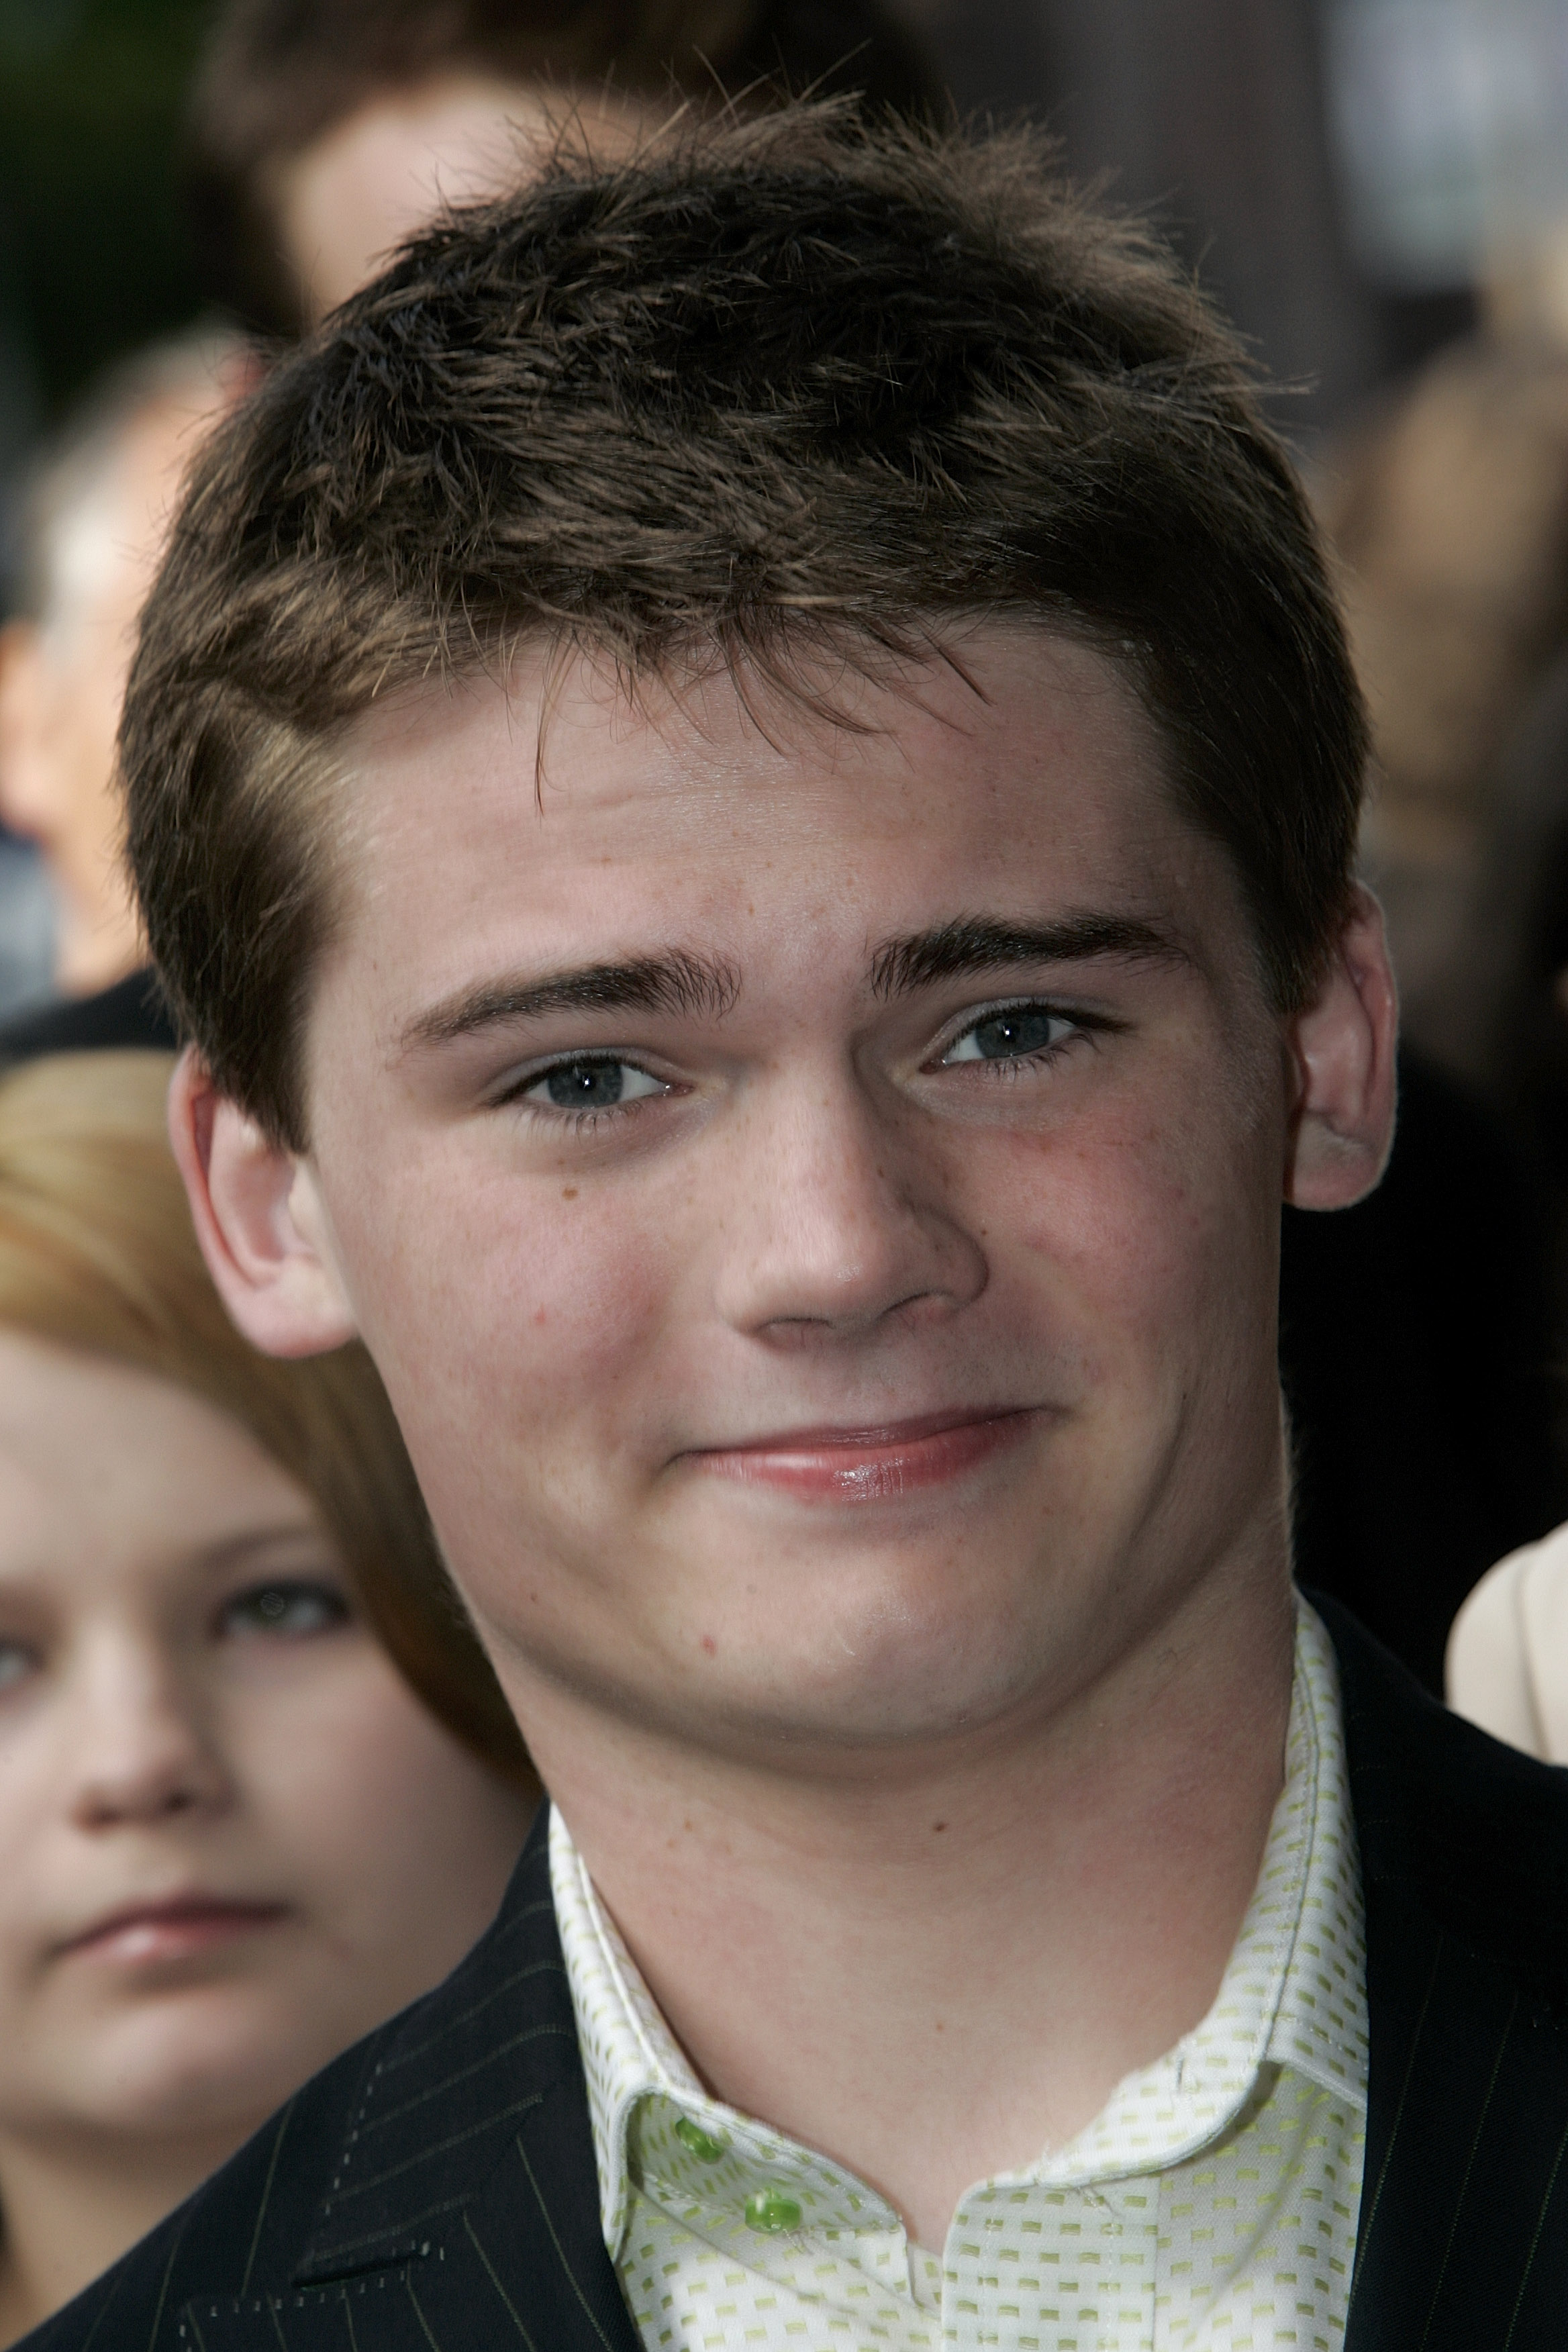 Jake Lloyd attends the world premiere of "Star Wars: Episode III - Revenge of the Sith"  on May 12, 2005 in San Francisco, California | Source: Getty images